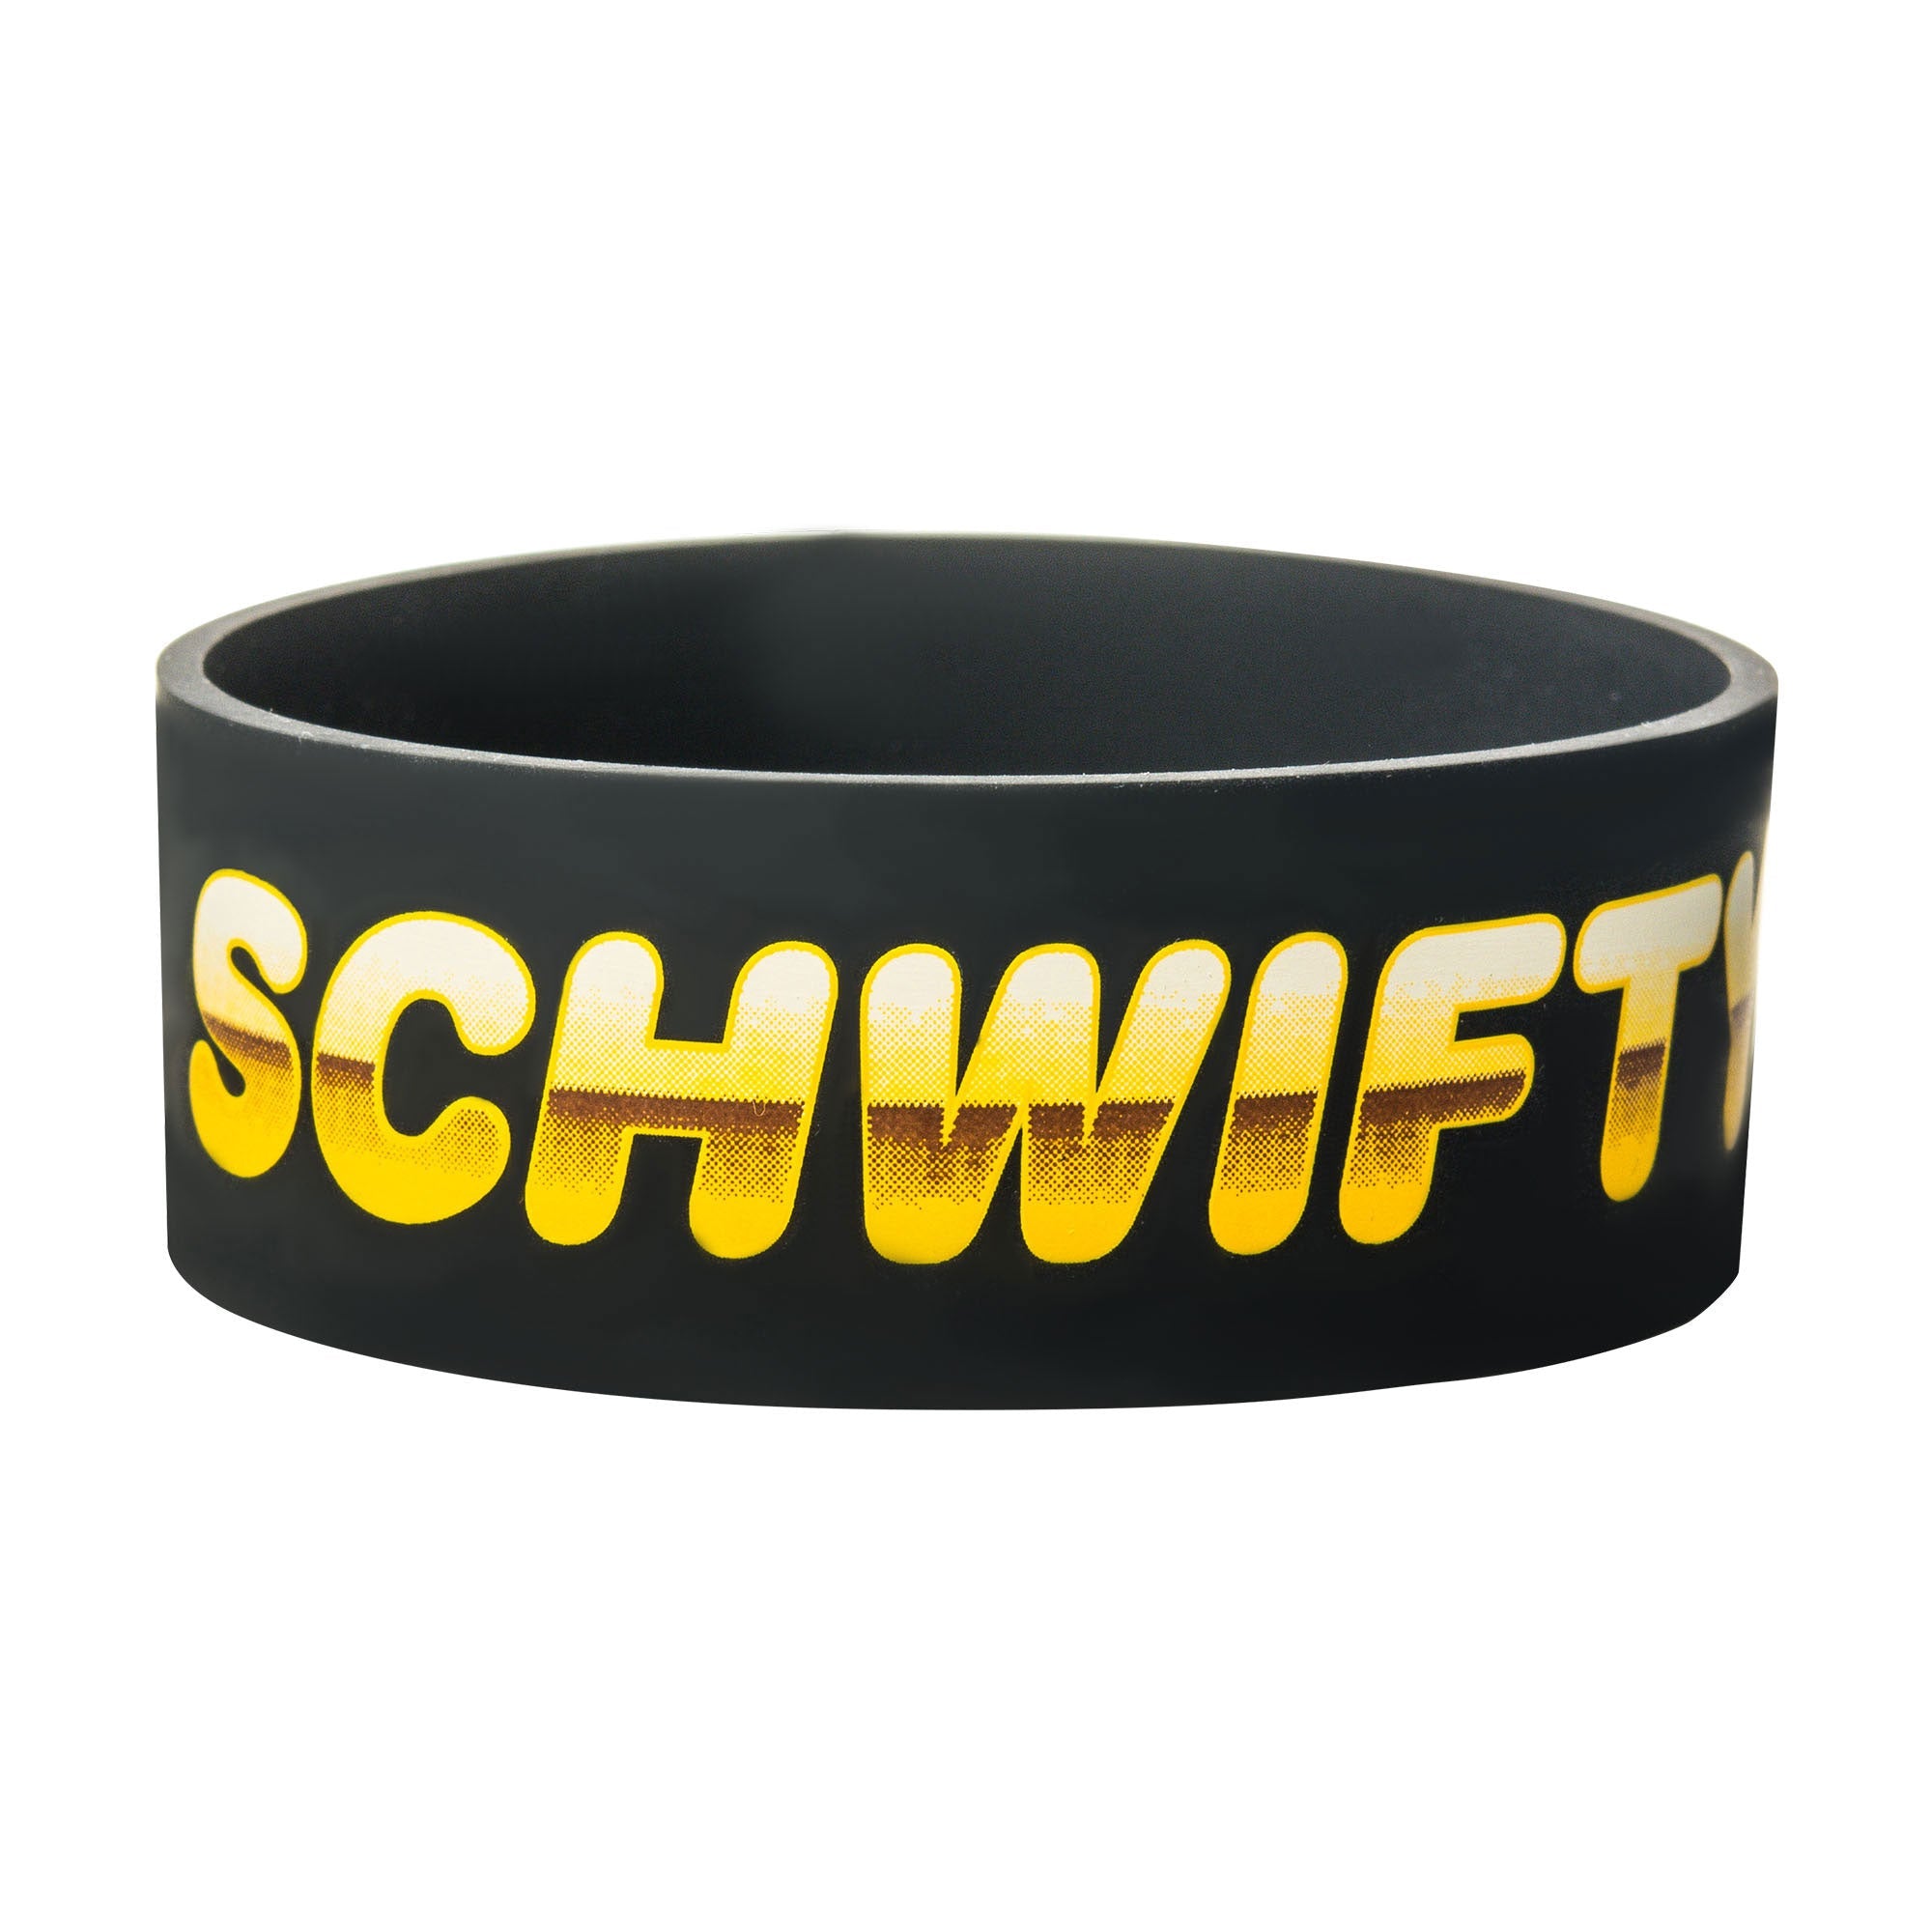 Cartoon Network Rick and Morty Rick Get Schwifty Rubber Bracelet